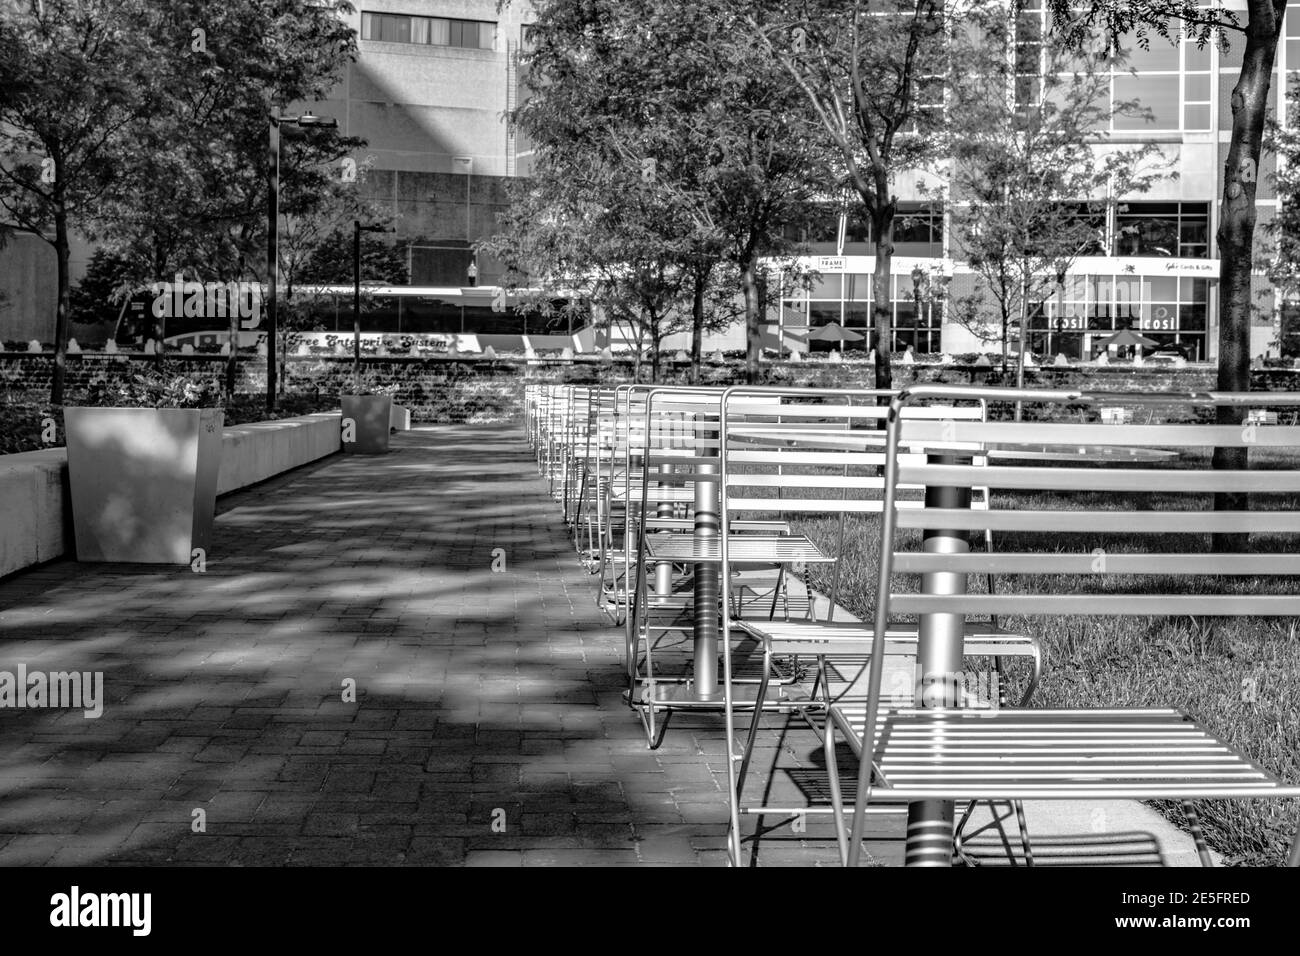 A line of cafe tables and chairs in a city park in black and white Stock Photo